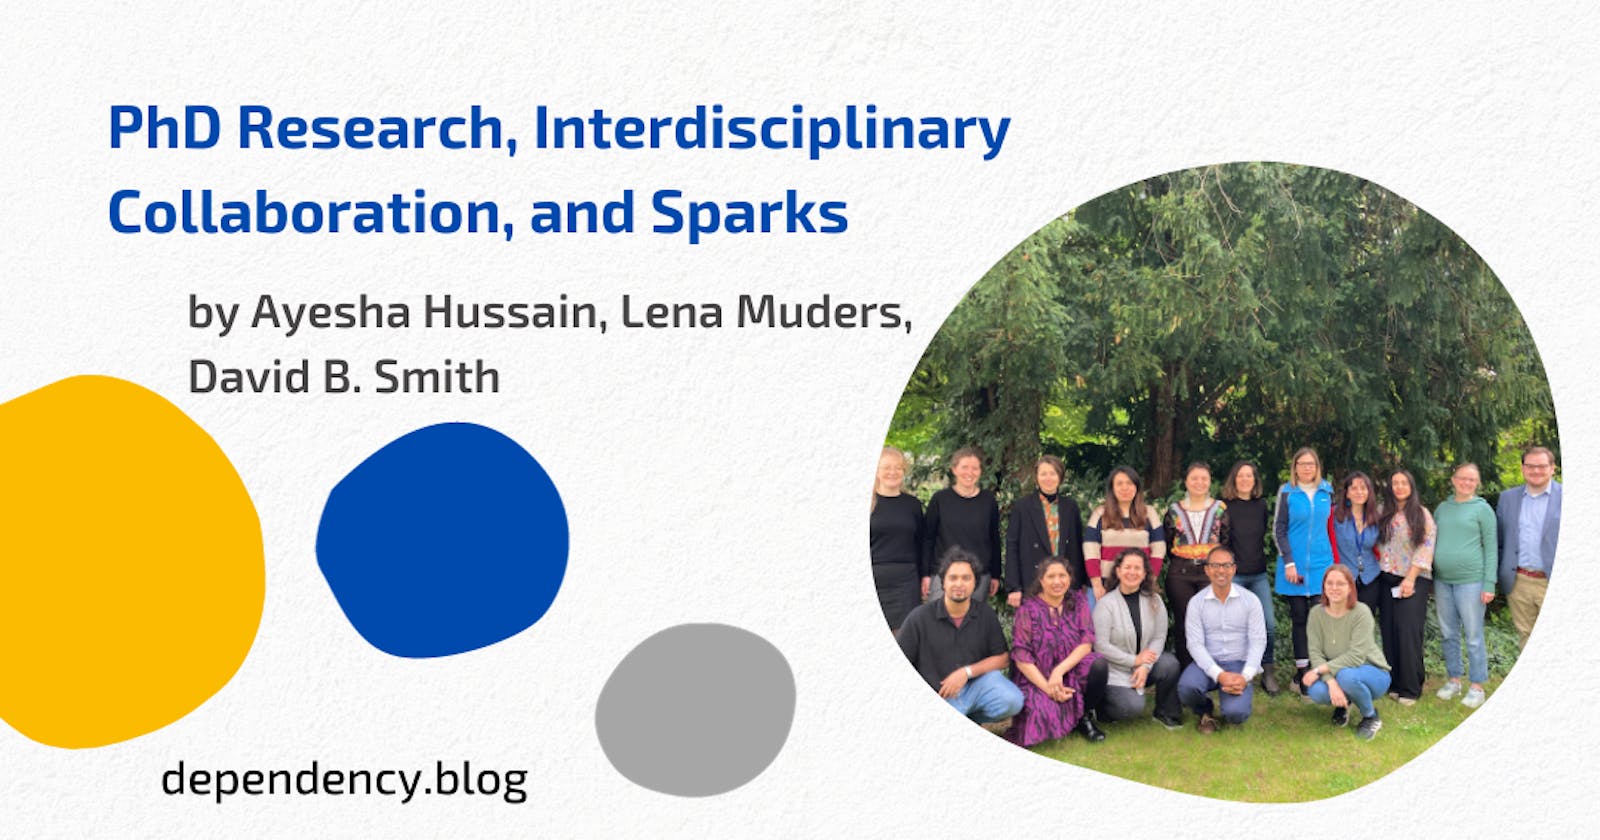 PhD Research, Interdisciplinary Collaboration, and Sparks